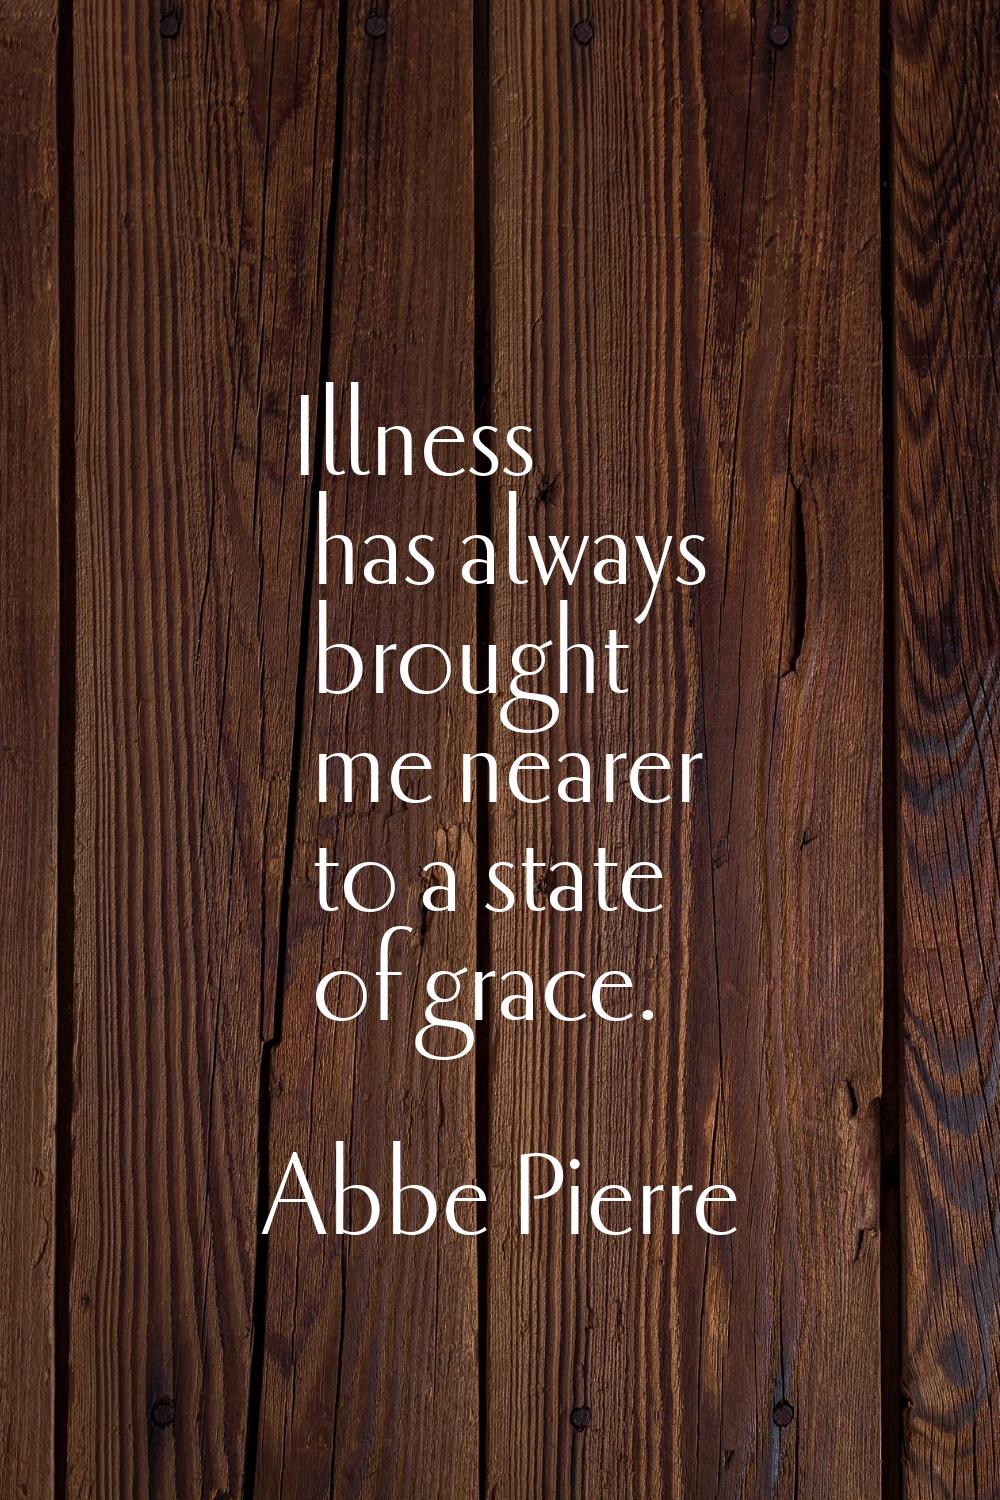 Illness has always brought me nearer to a state of grace.